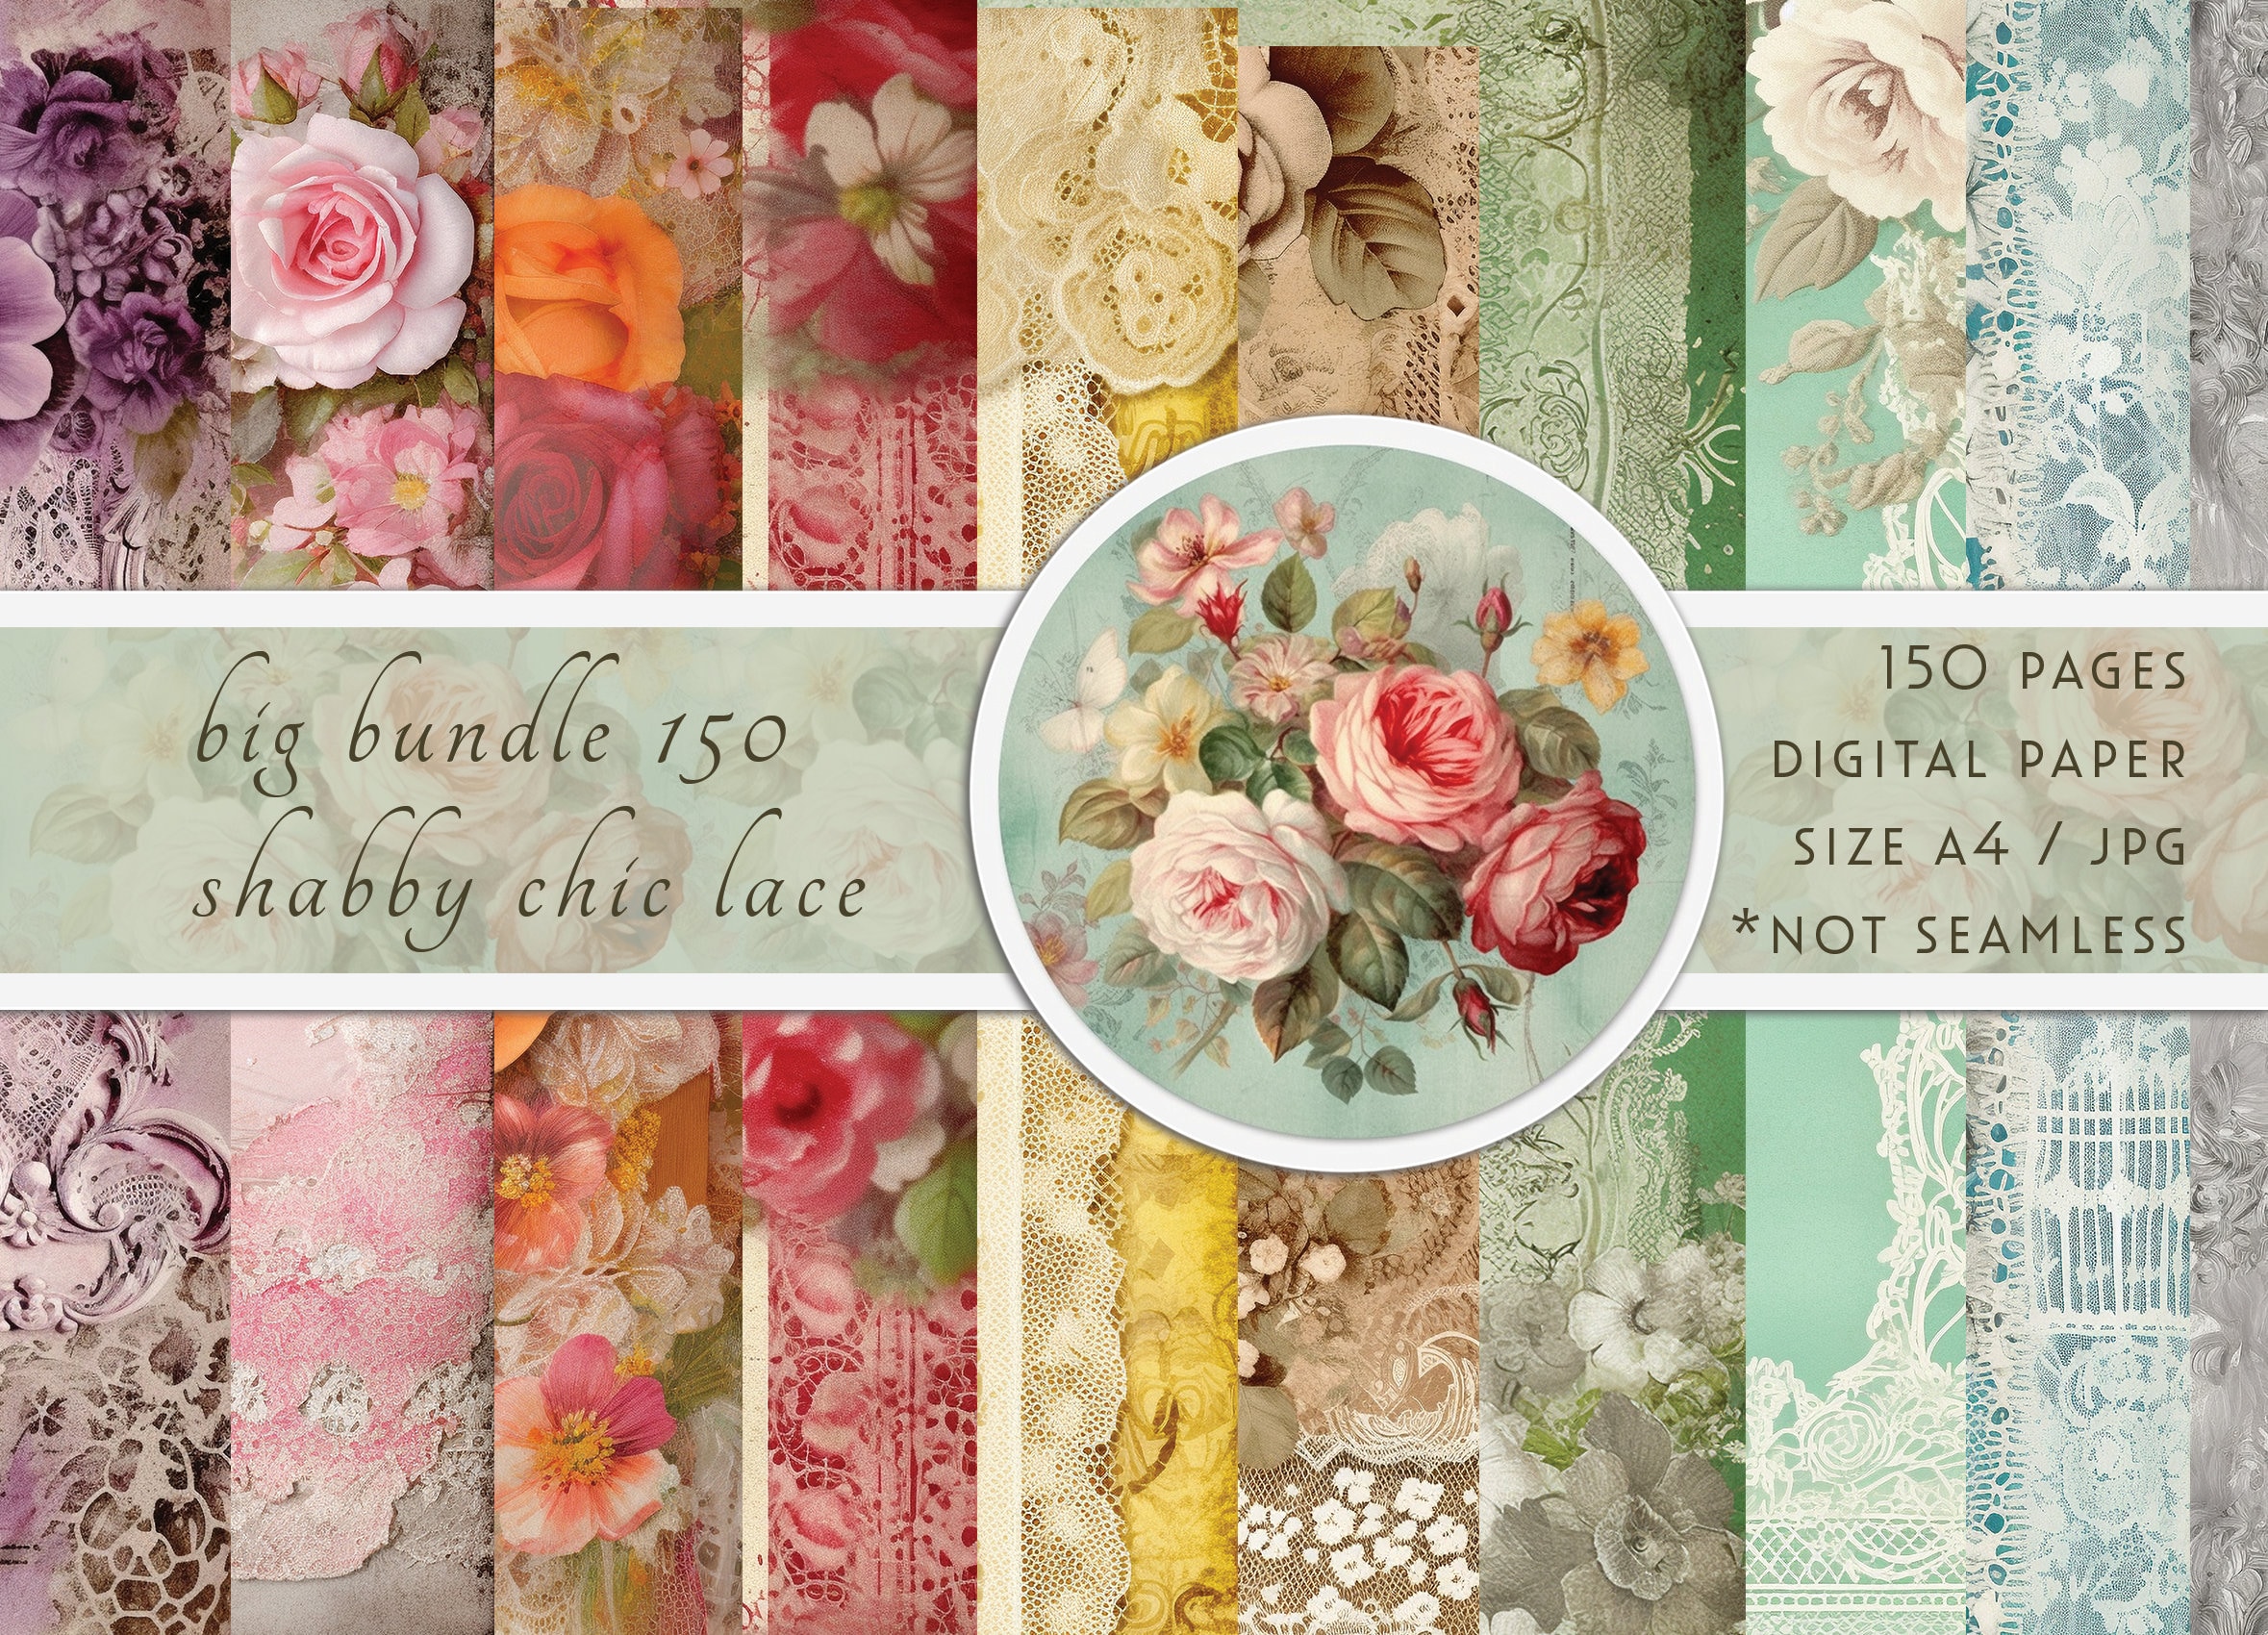 Handmade gifts ~ hanging hand towels - Shabby Art Boutique